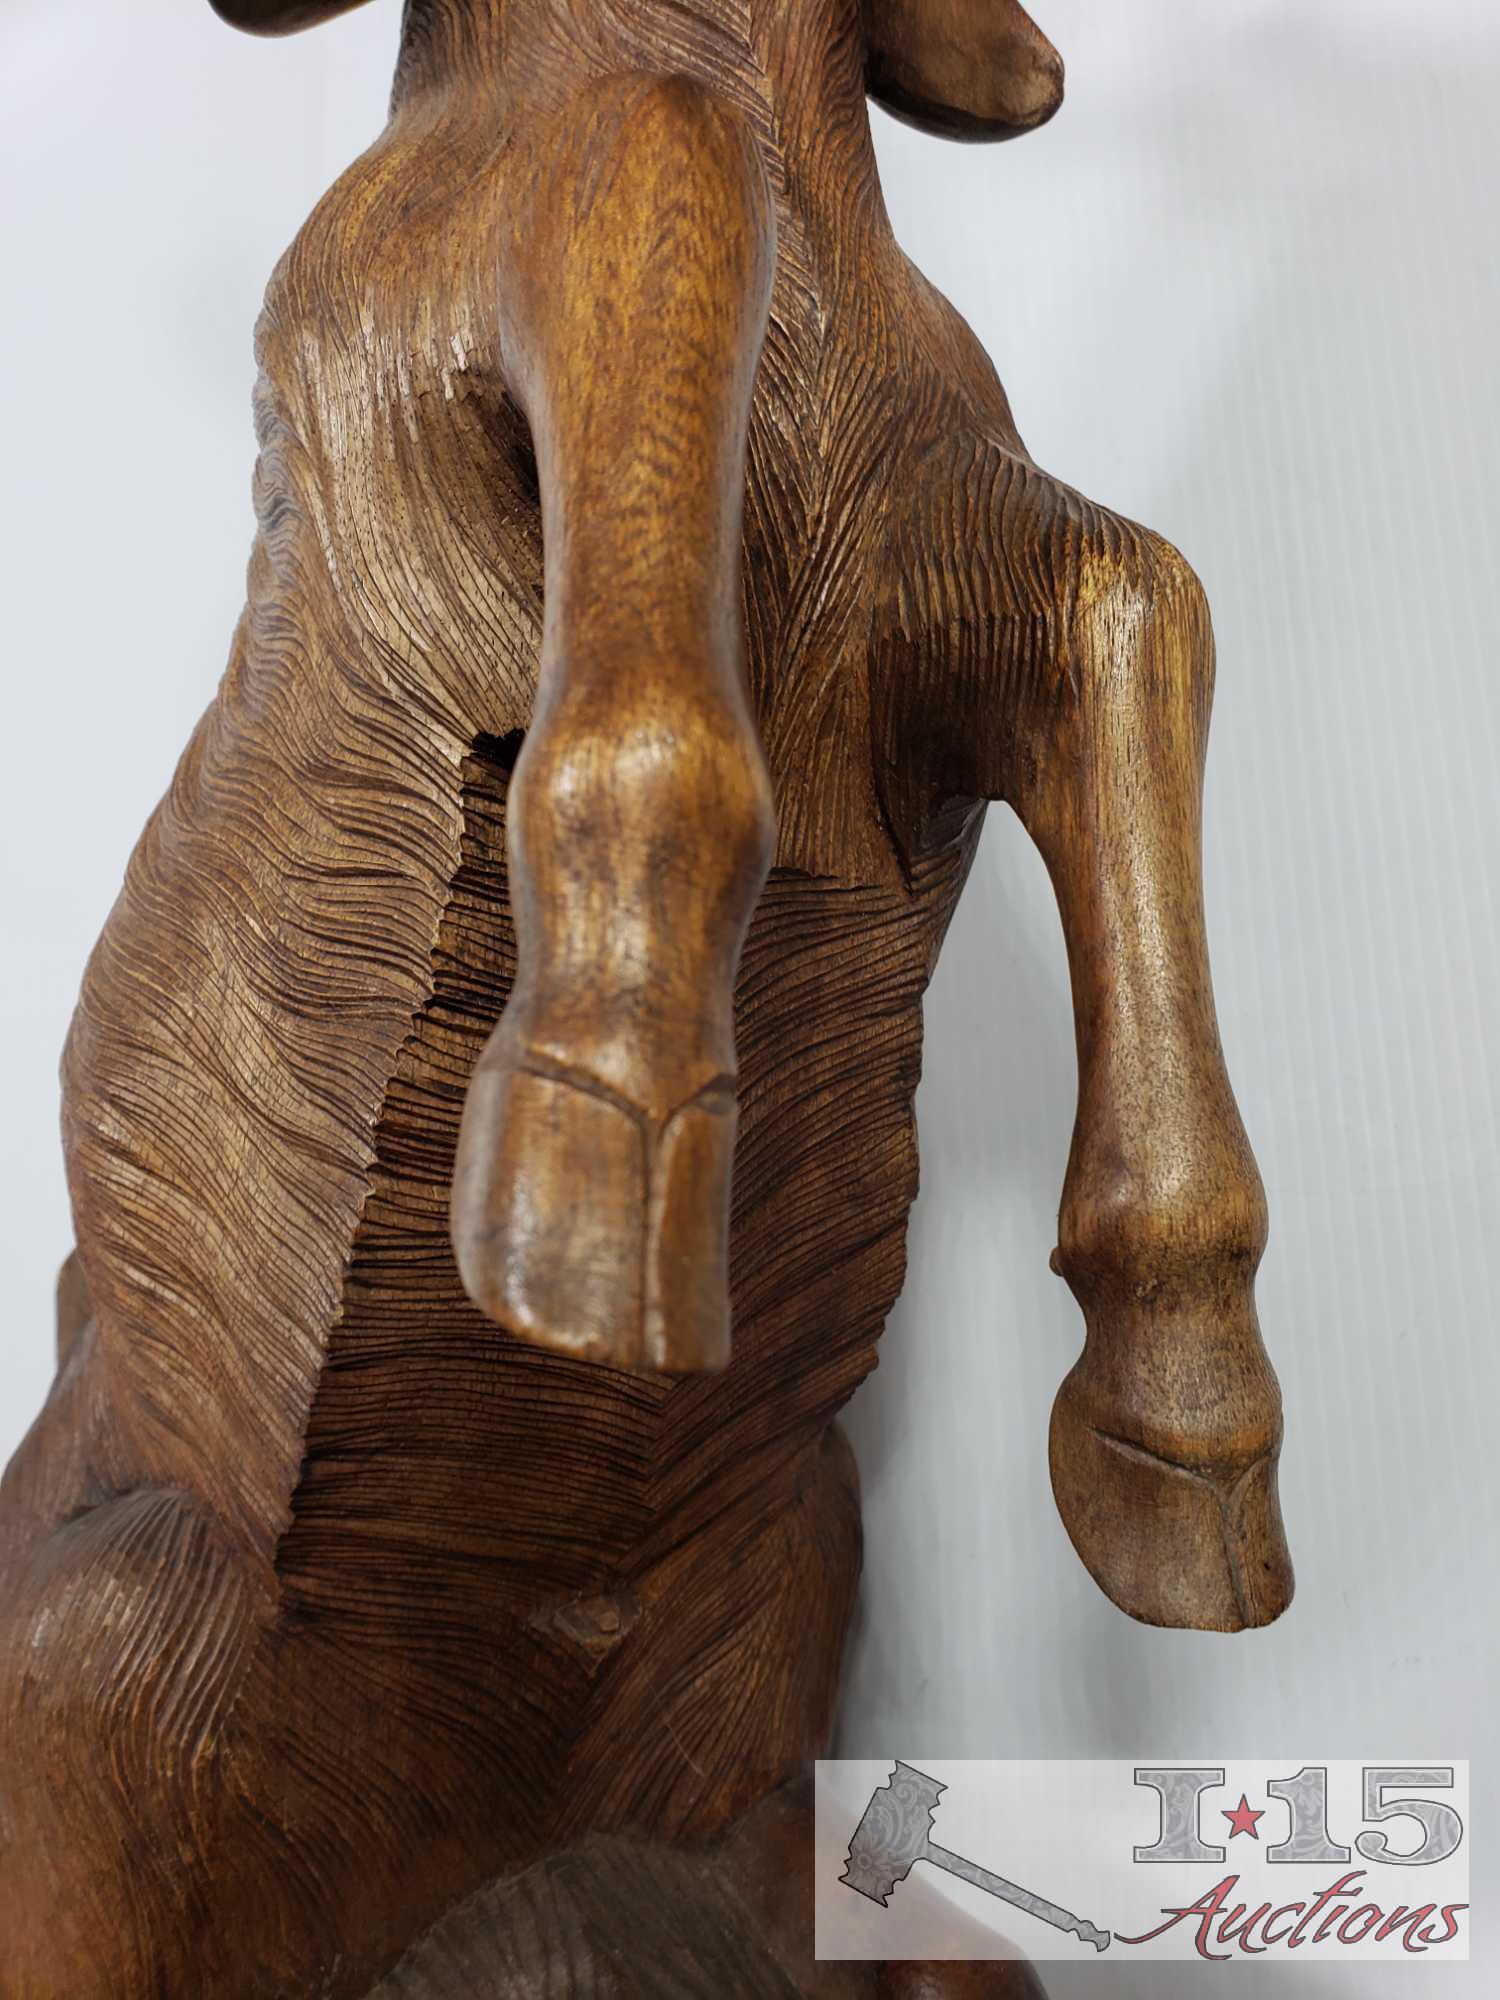 Hand Carved Javanese Ebony Wooden Goats Very detailed and modeled after the goats of the Island of